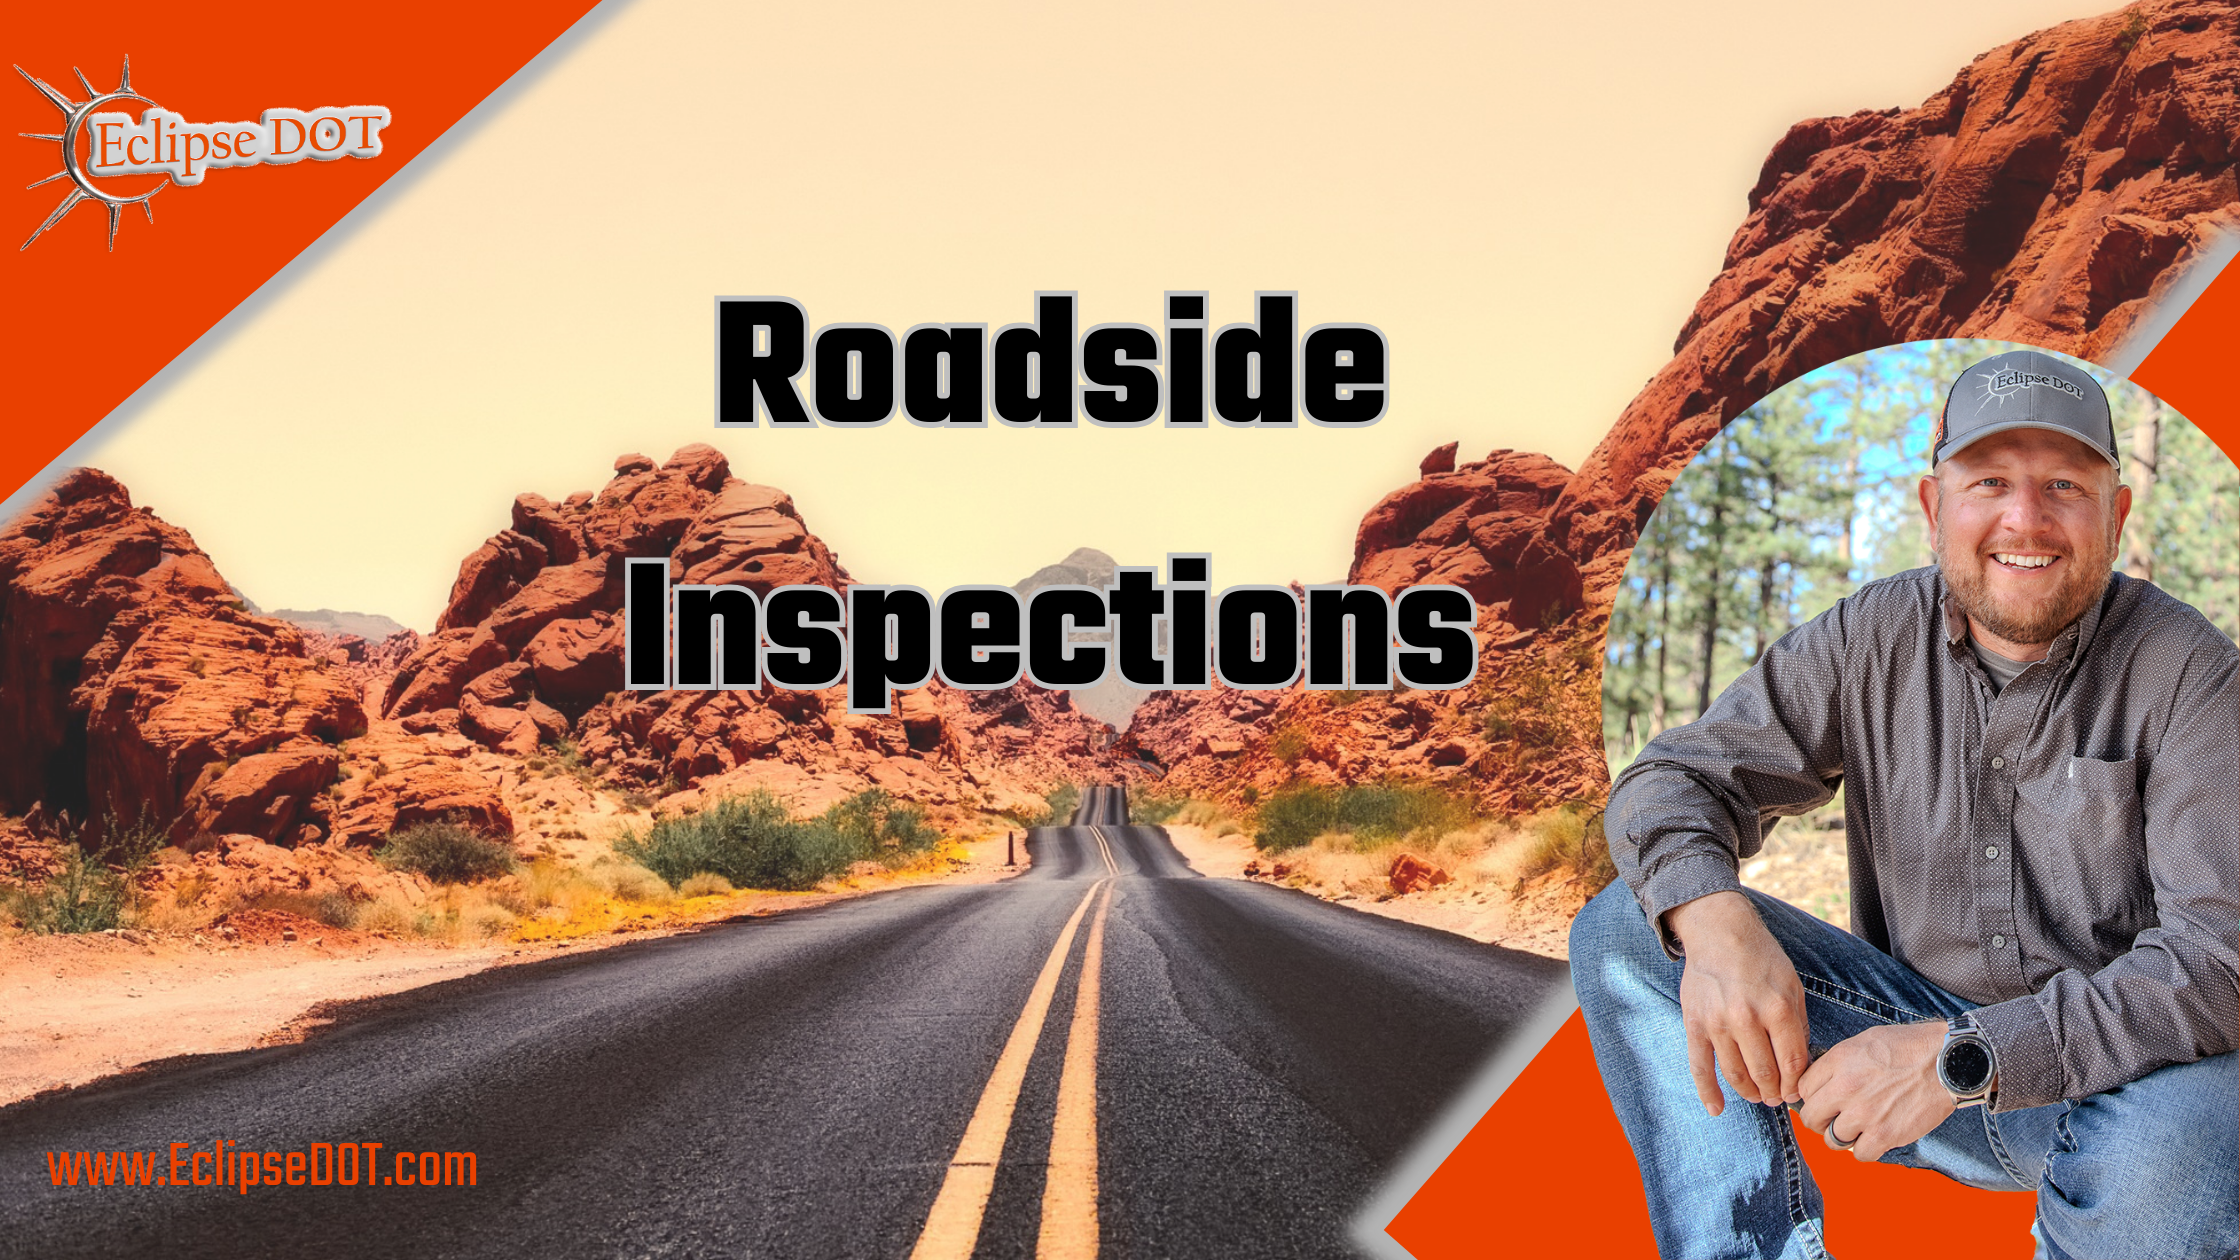 Roadside inspection of a commercial vehicle